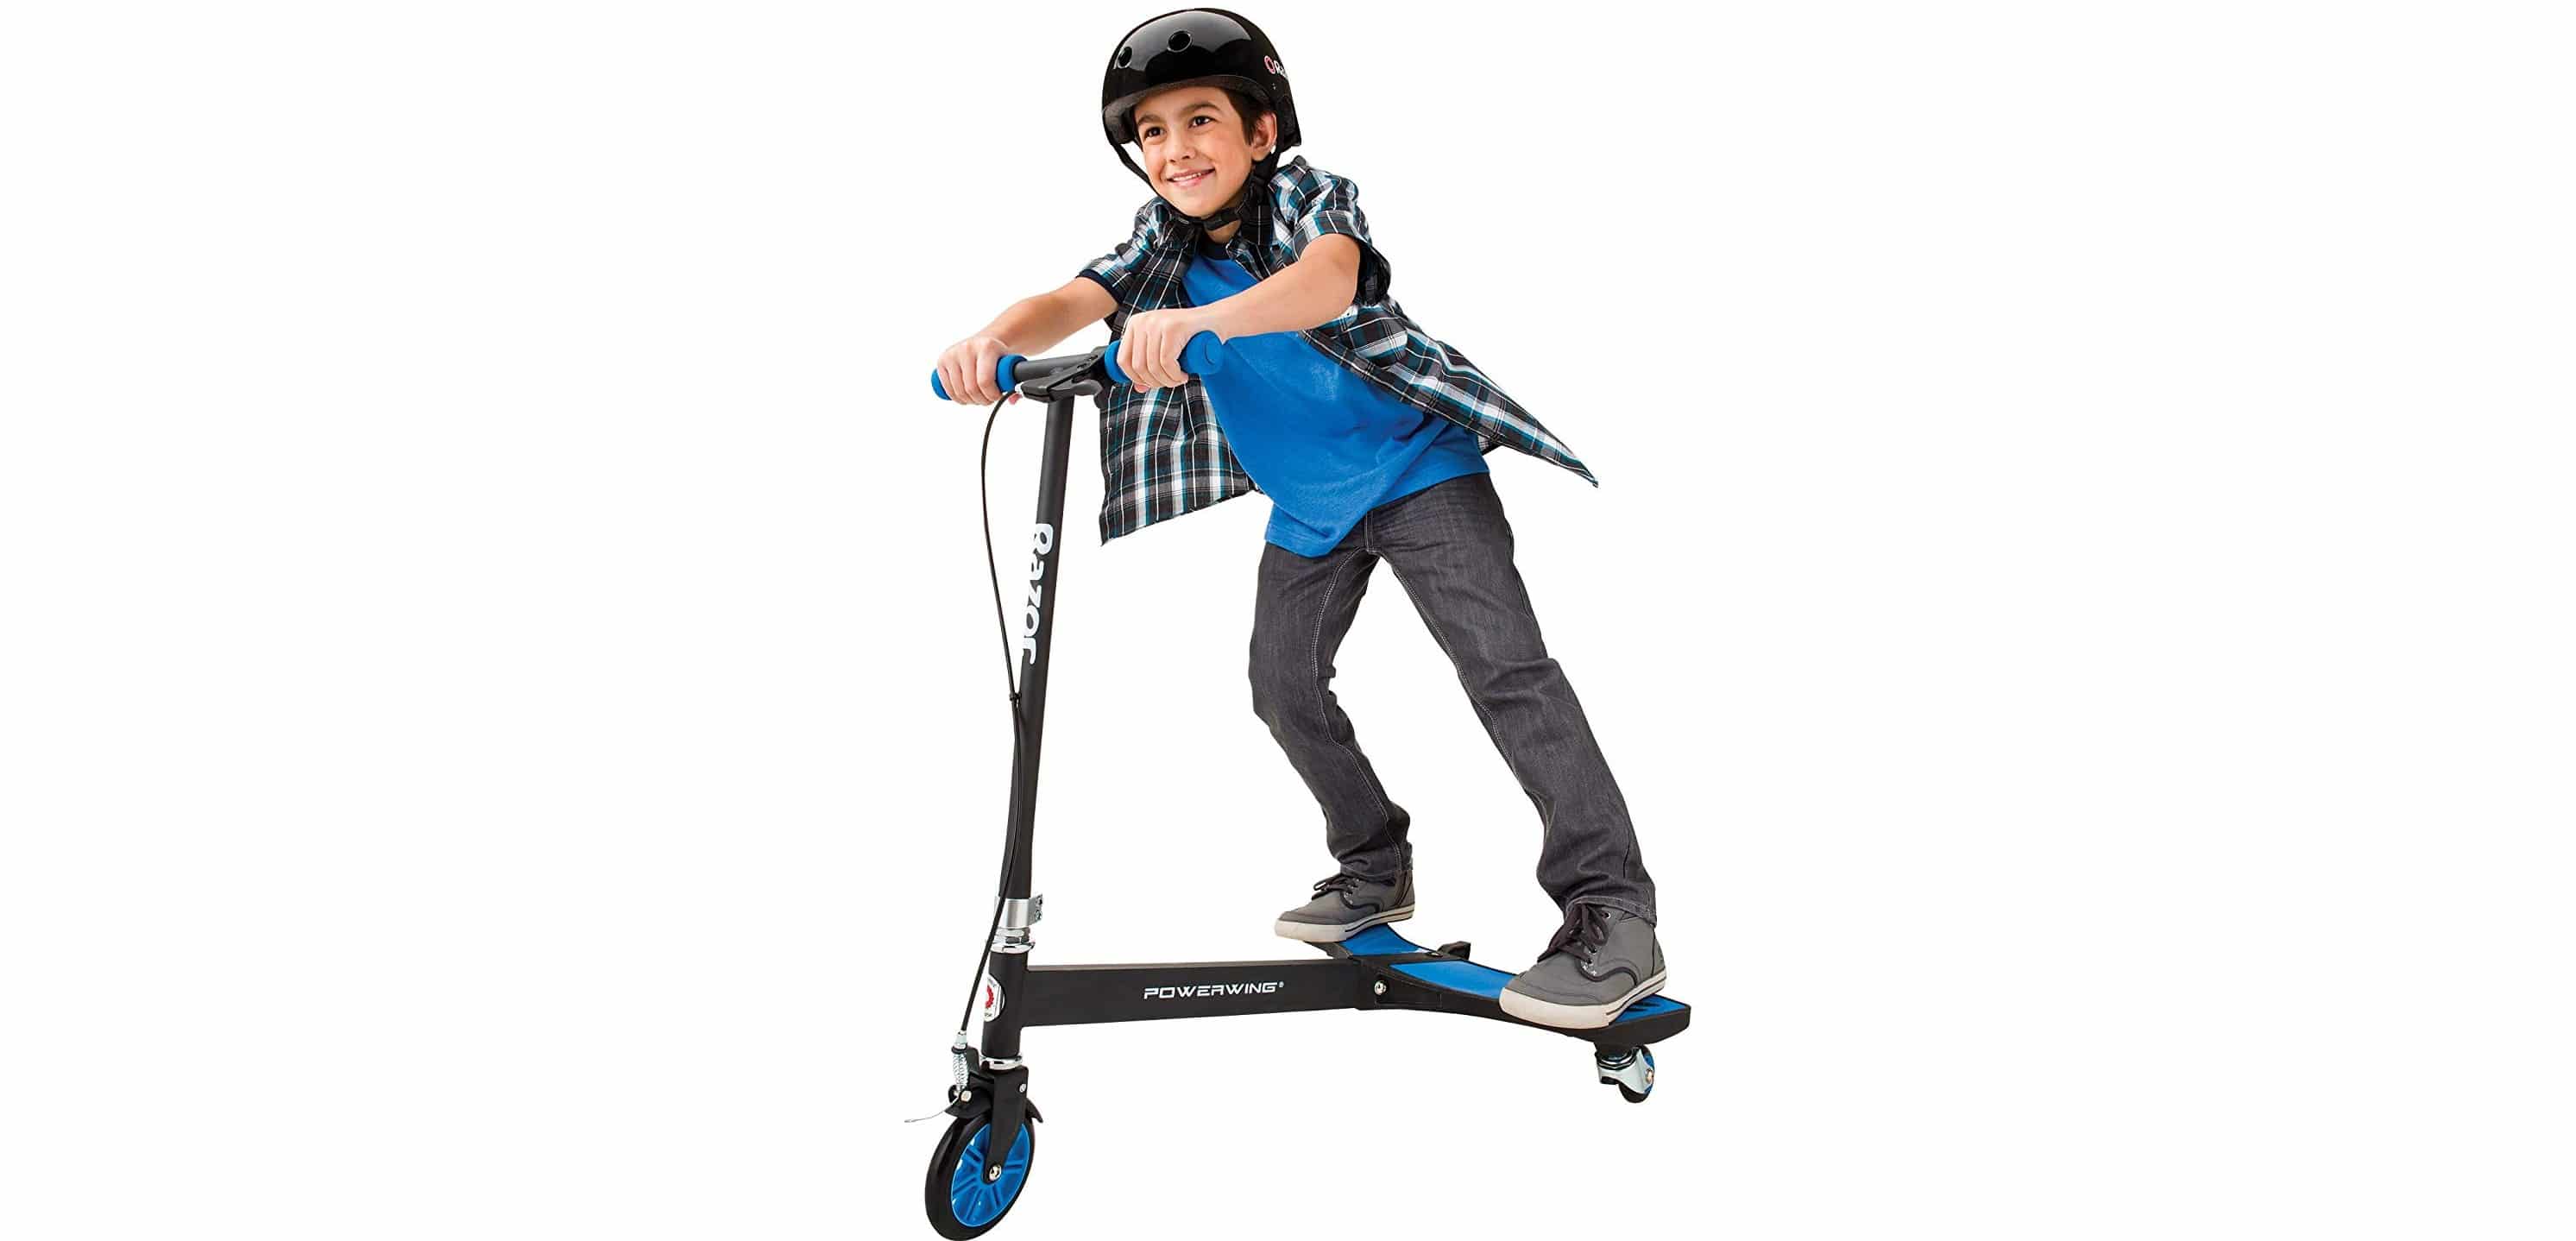 swing scooter for kids